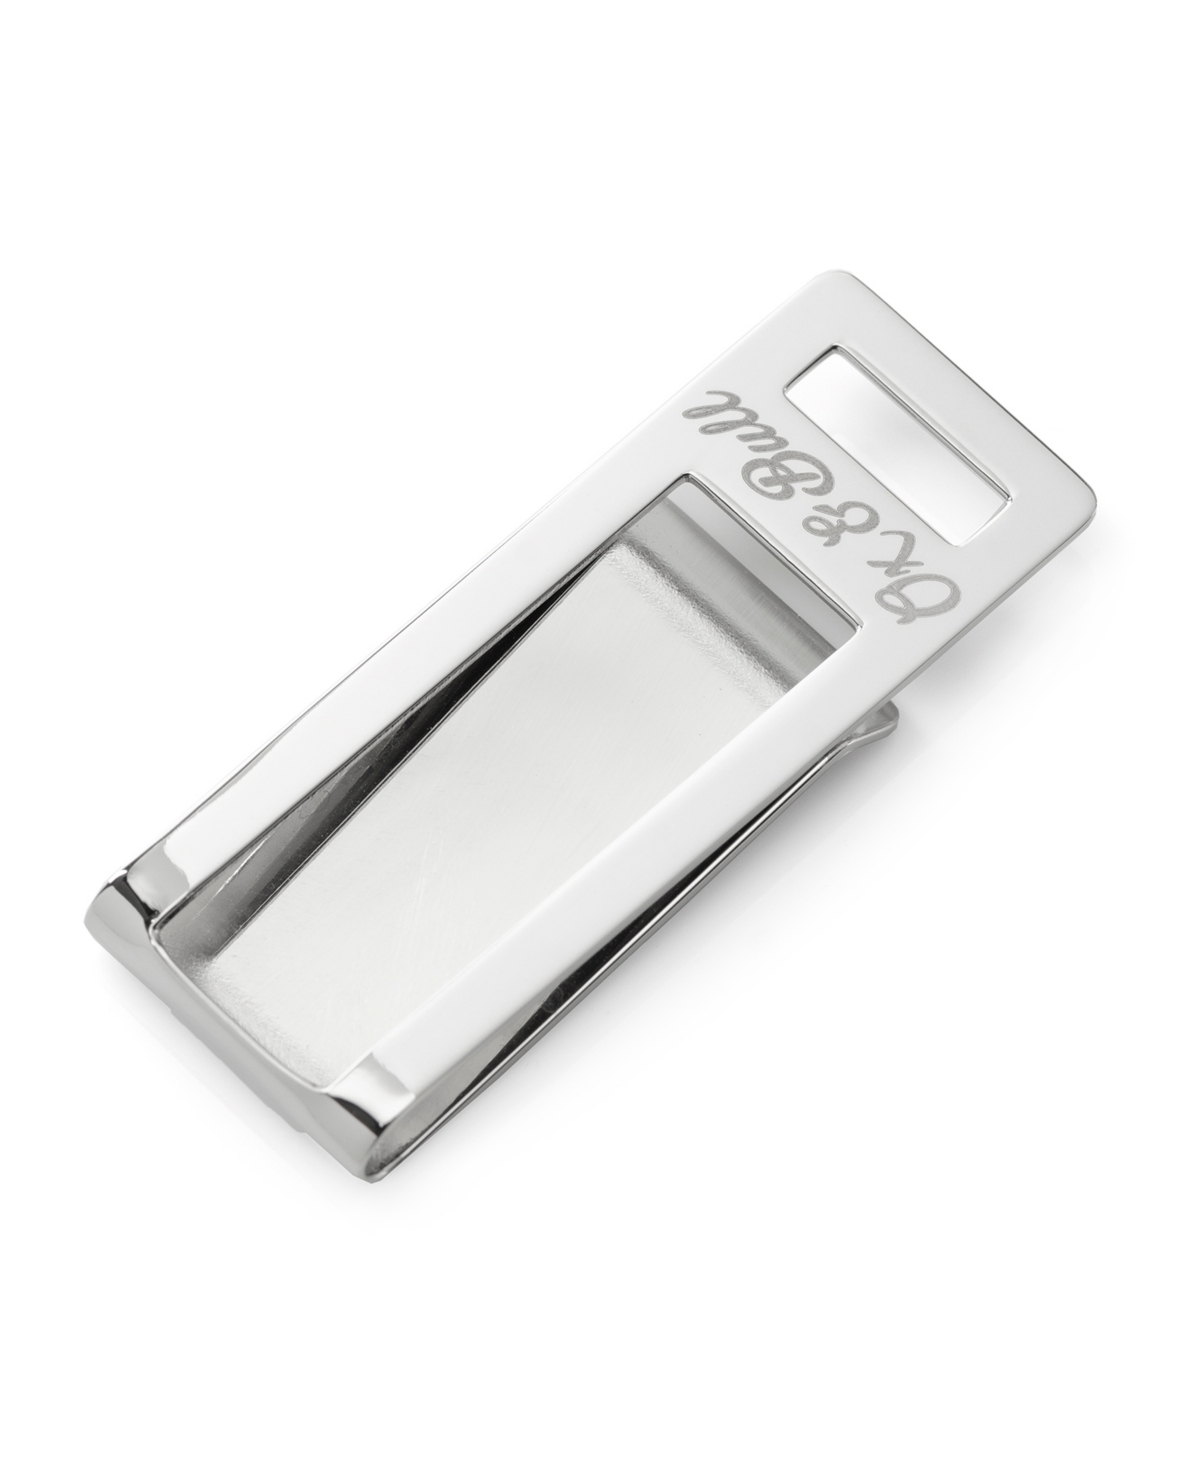 Ox & Bull Trading Co. Men's Stainless Steel Cut Out Money Clip In Silver